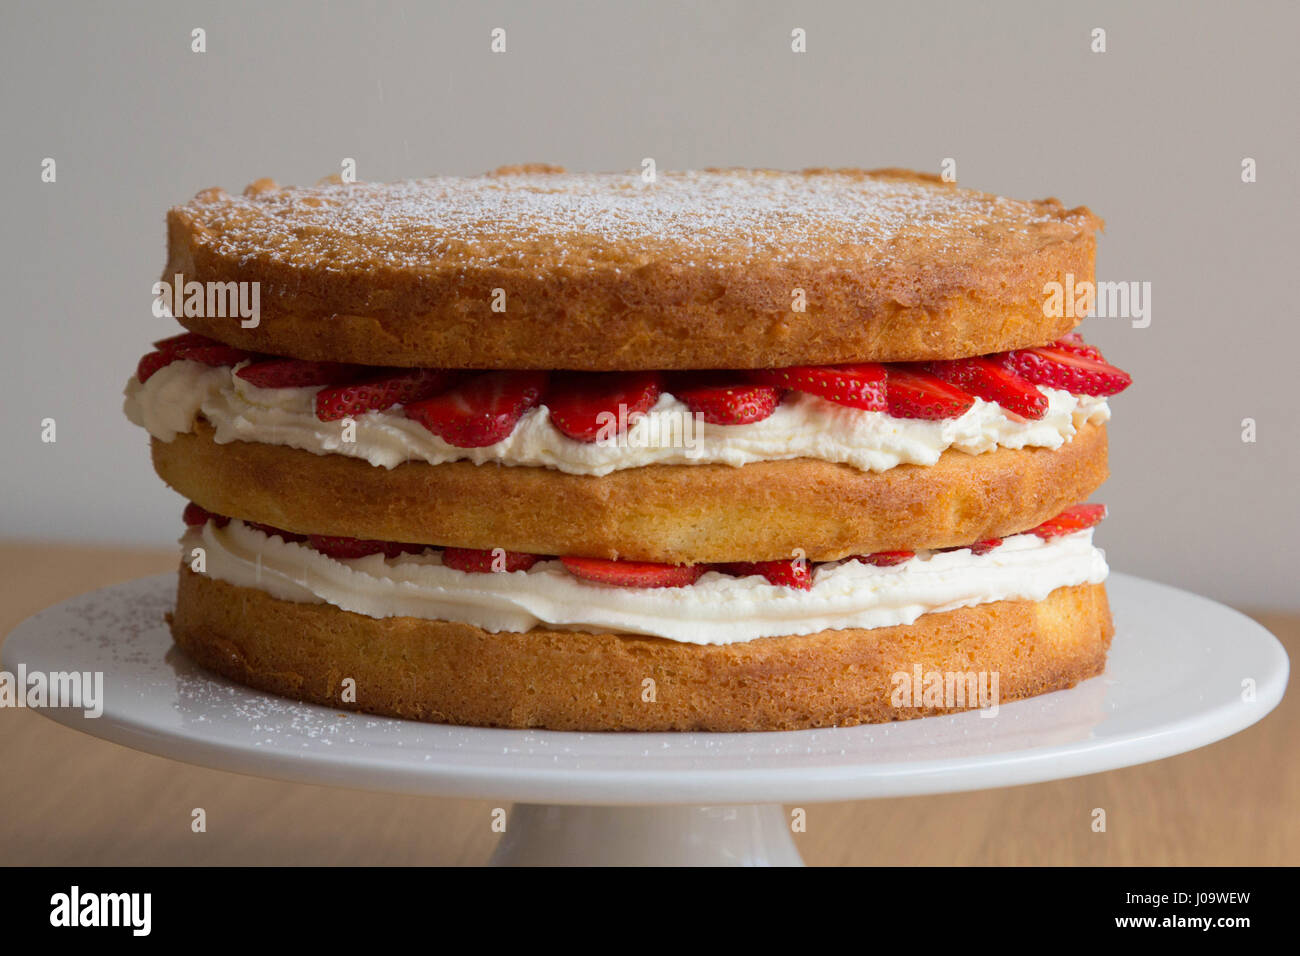 Victoria Sponge Cake with Whipped Cream and Strawberry Stock Photo